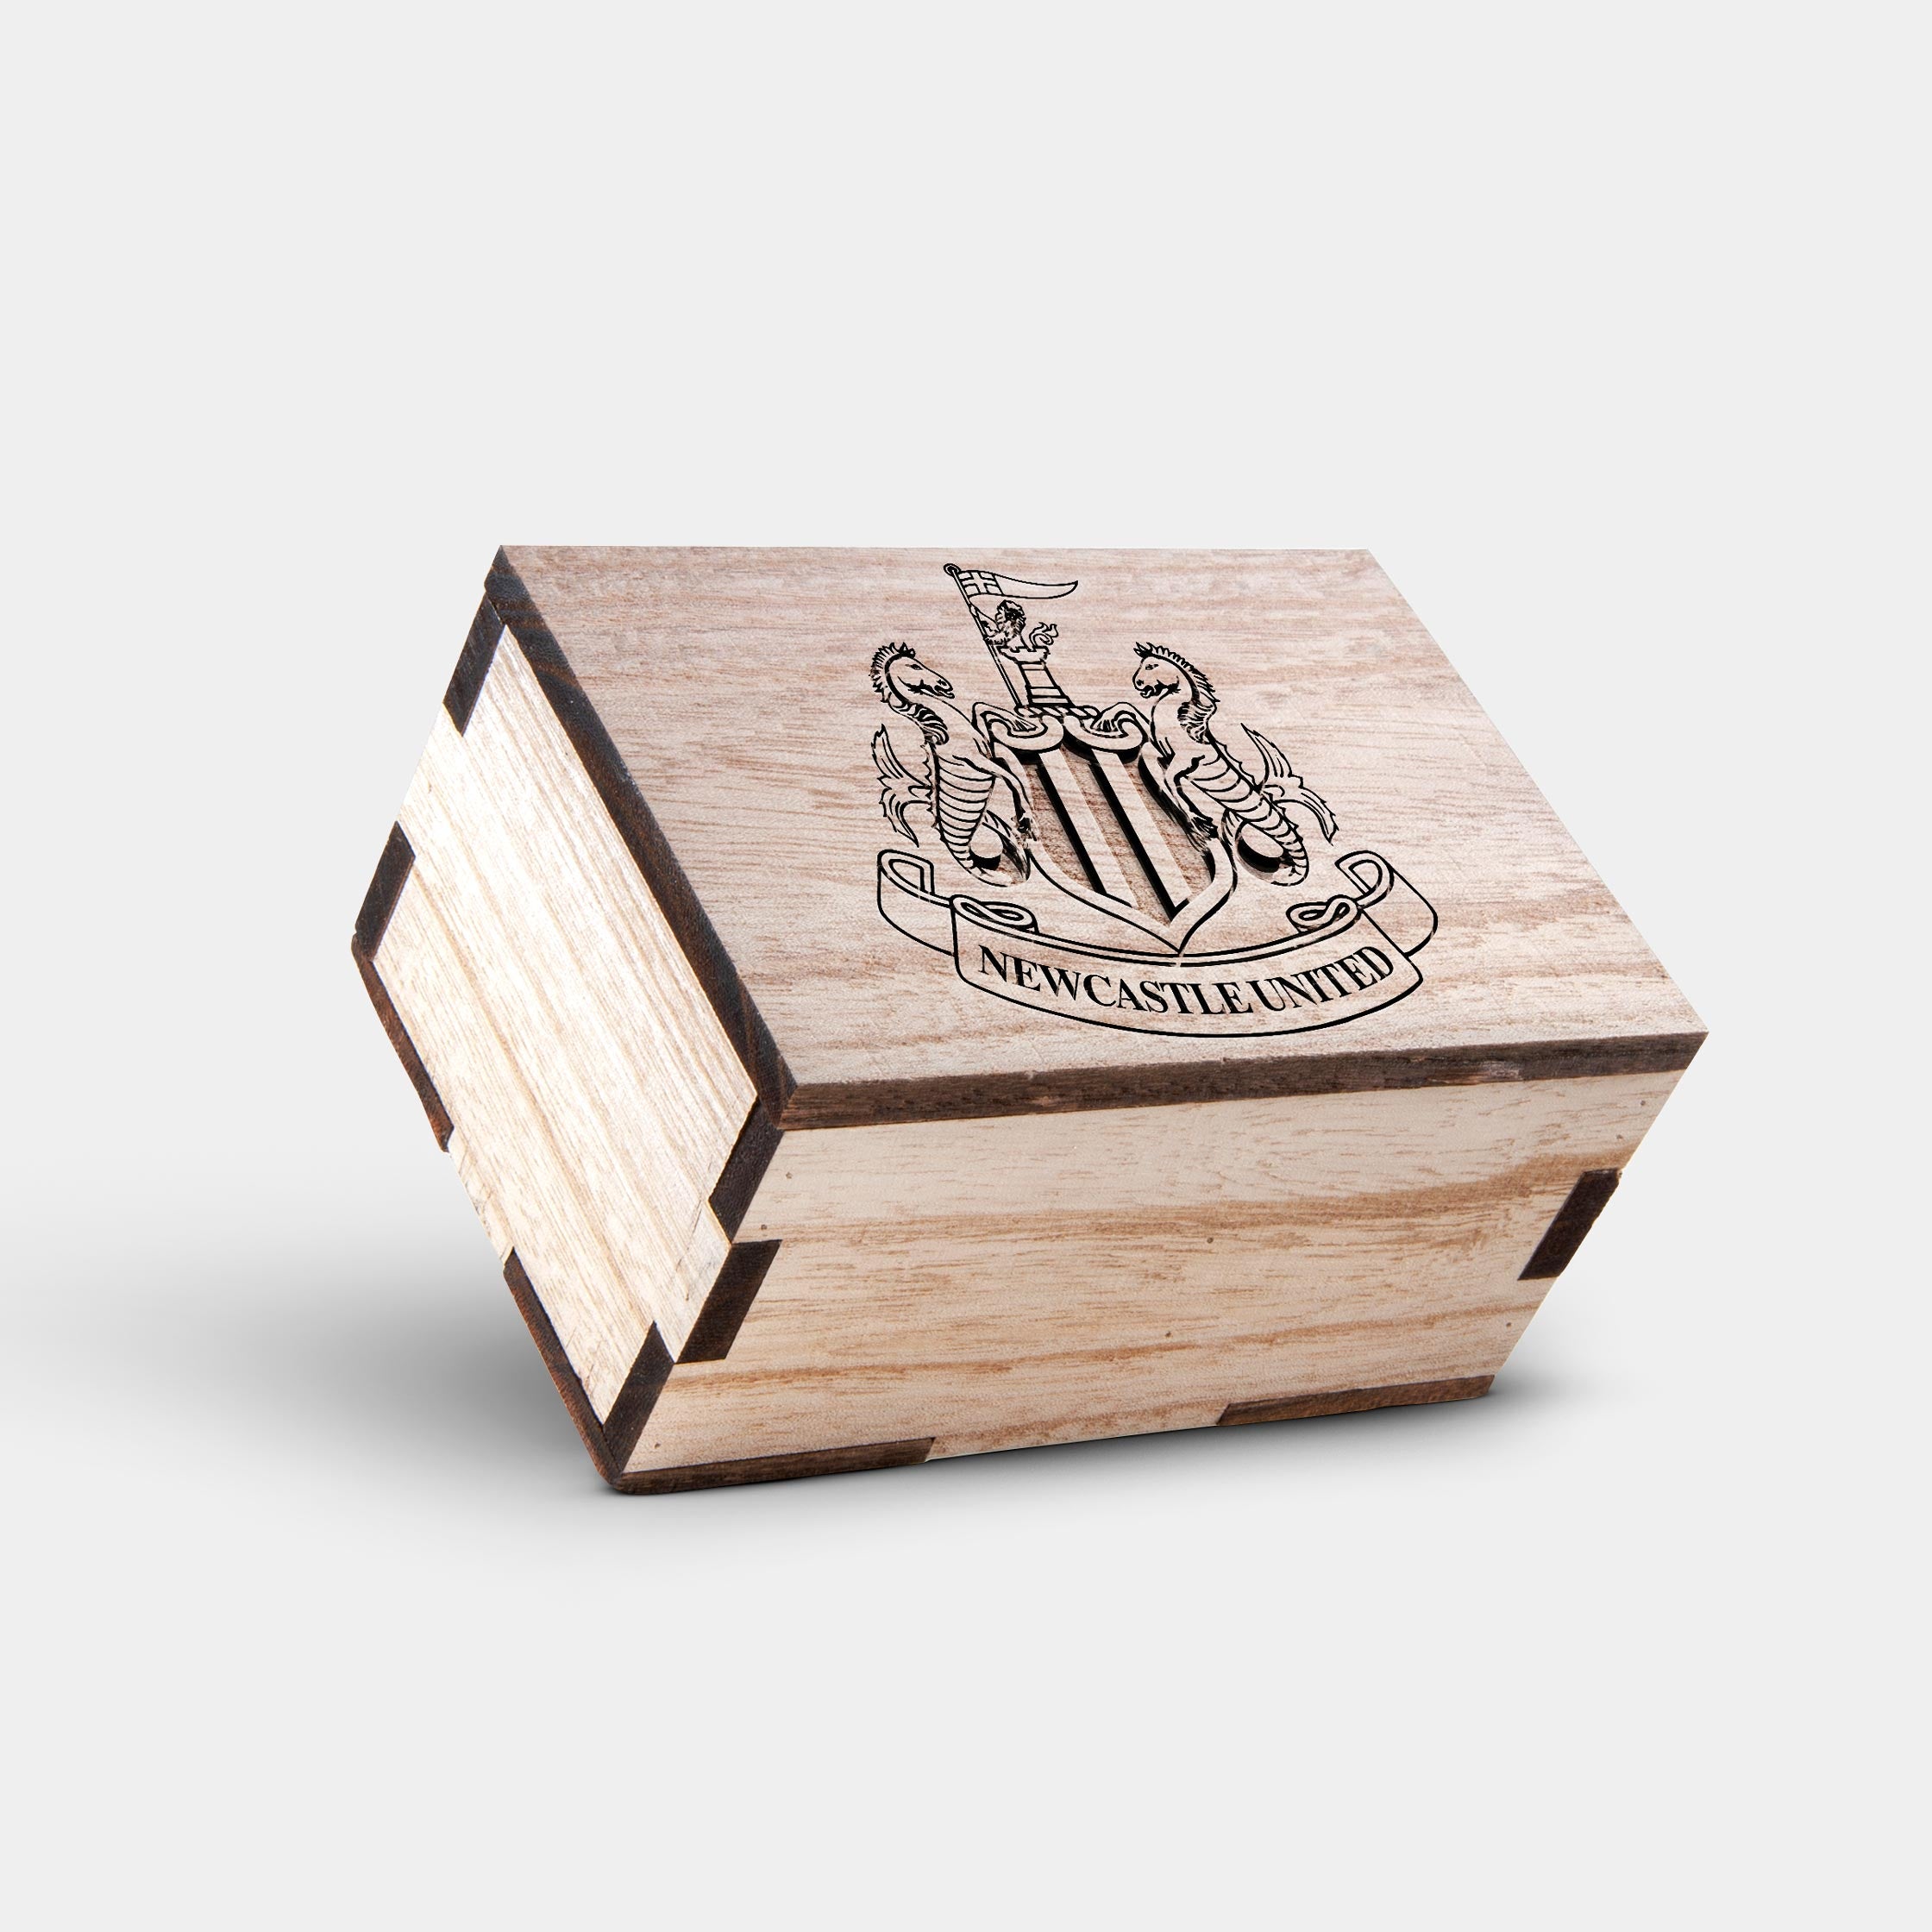 Best Newcastle United F.C. Mahogany And Walnut Wood Chronograph Watch - Engraved In Nature